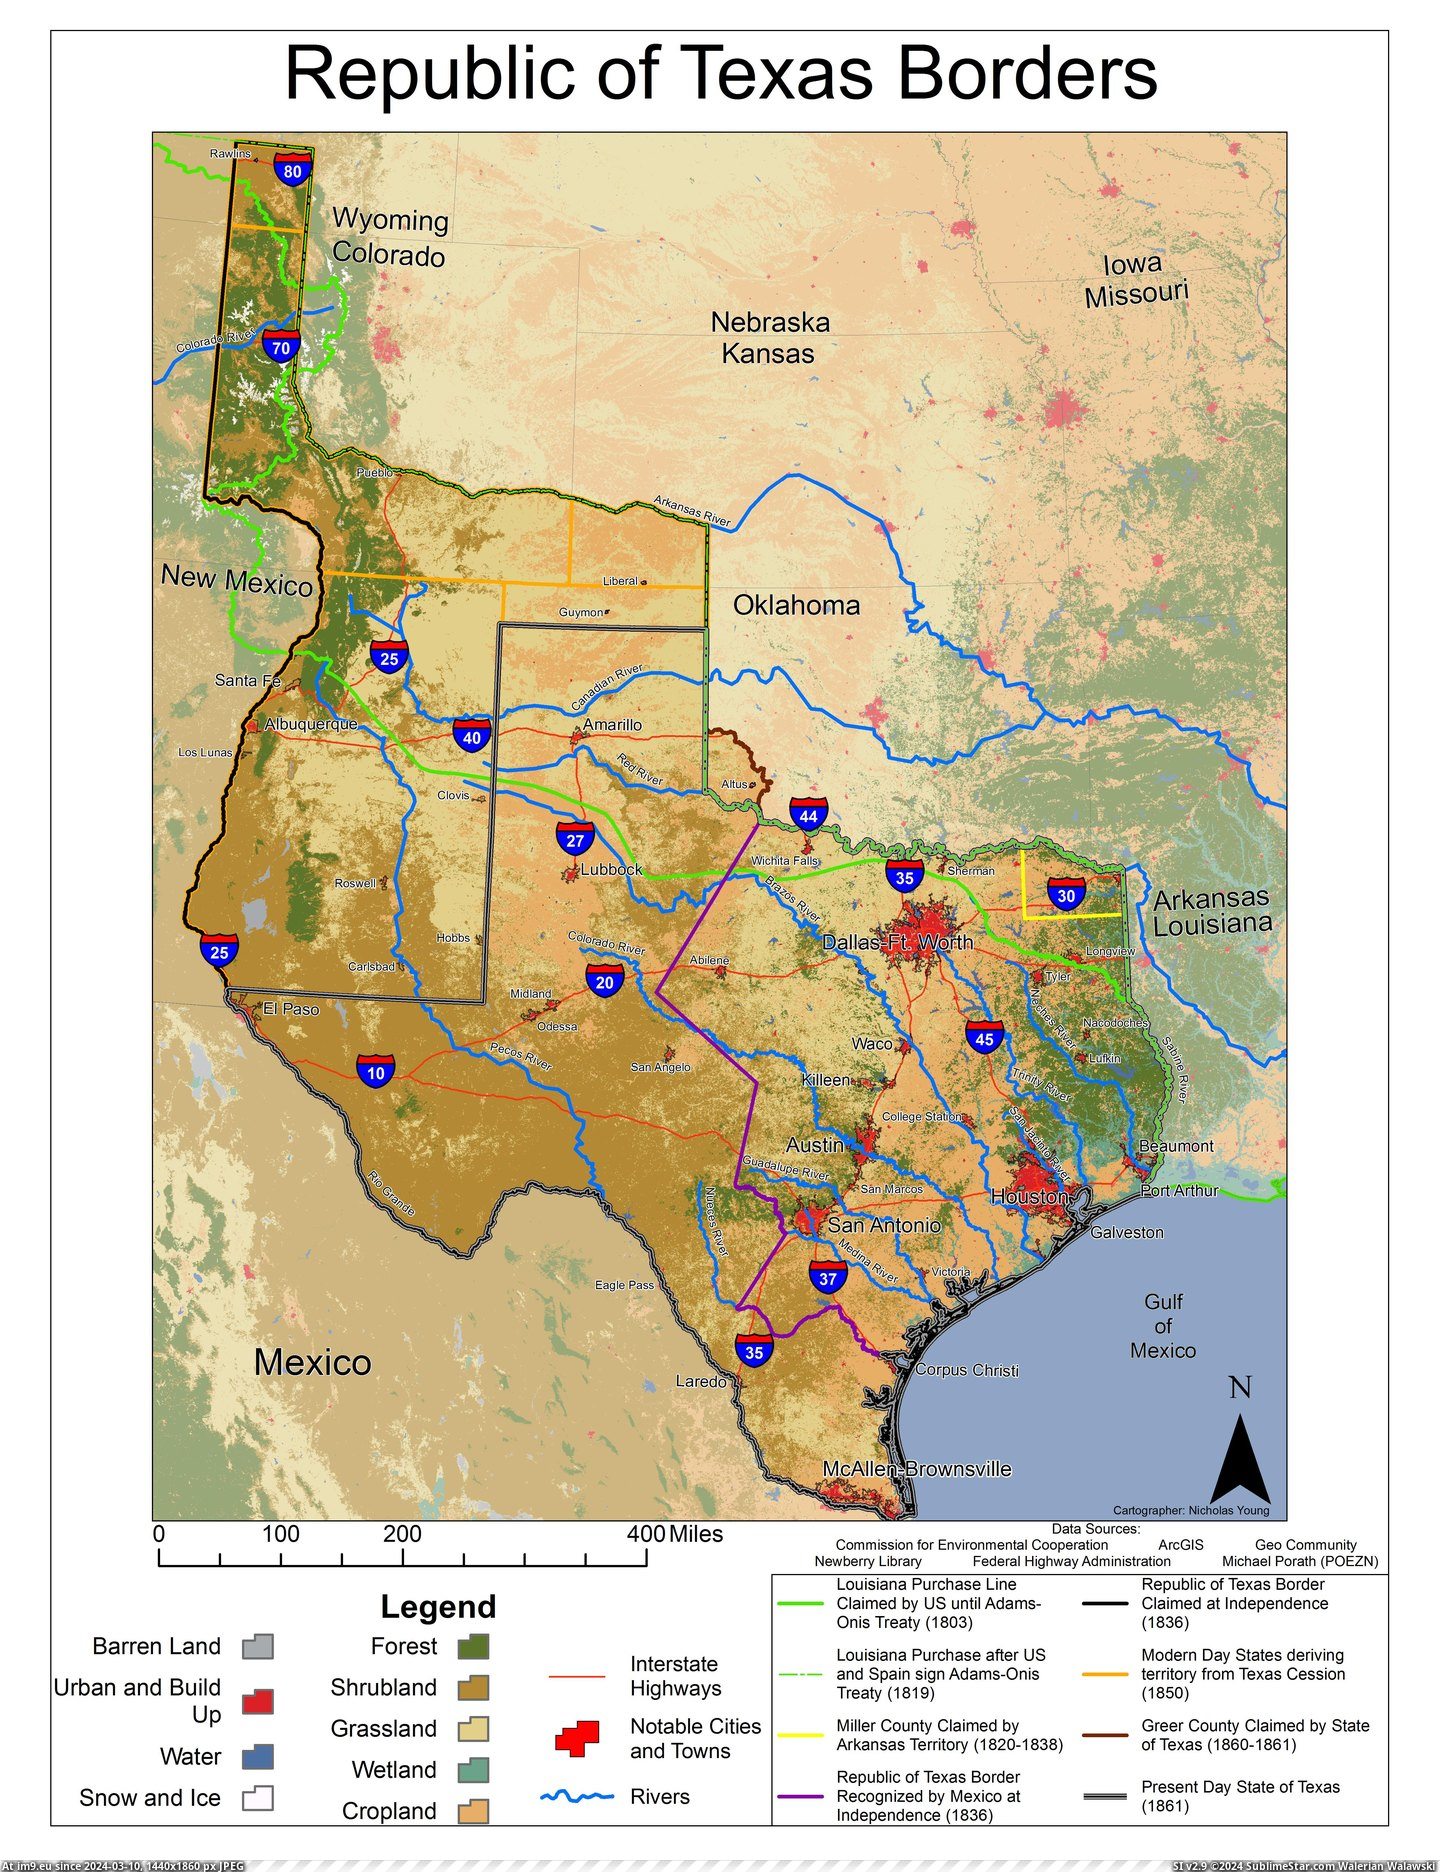 #Texas #Borders #Historical [Mapporn] Historical borders of Texas [5100x6600] Pic. (Изображение из альбом My r/MAPS favs))